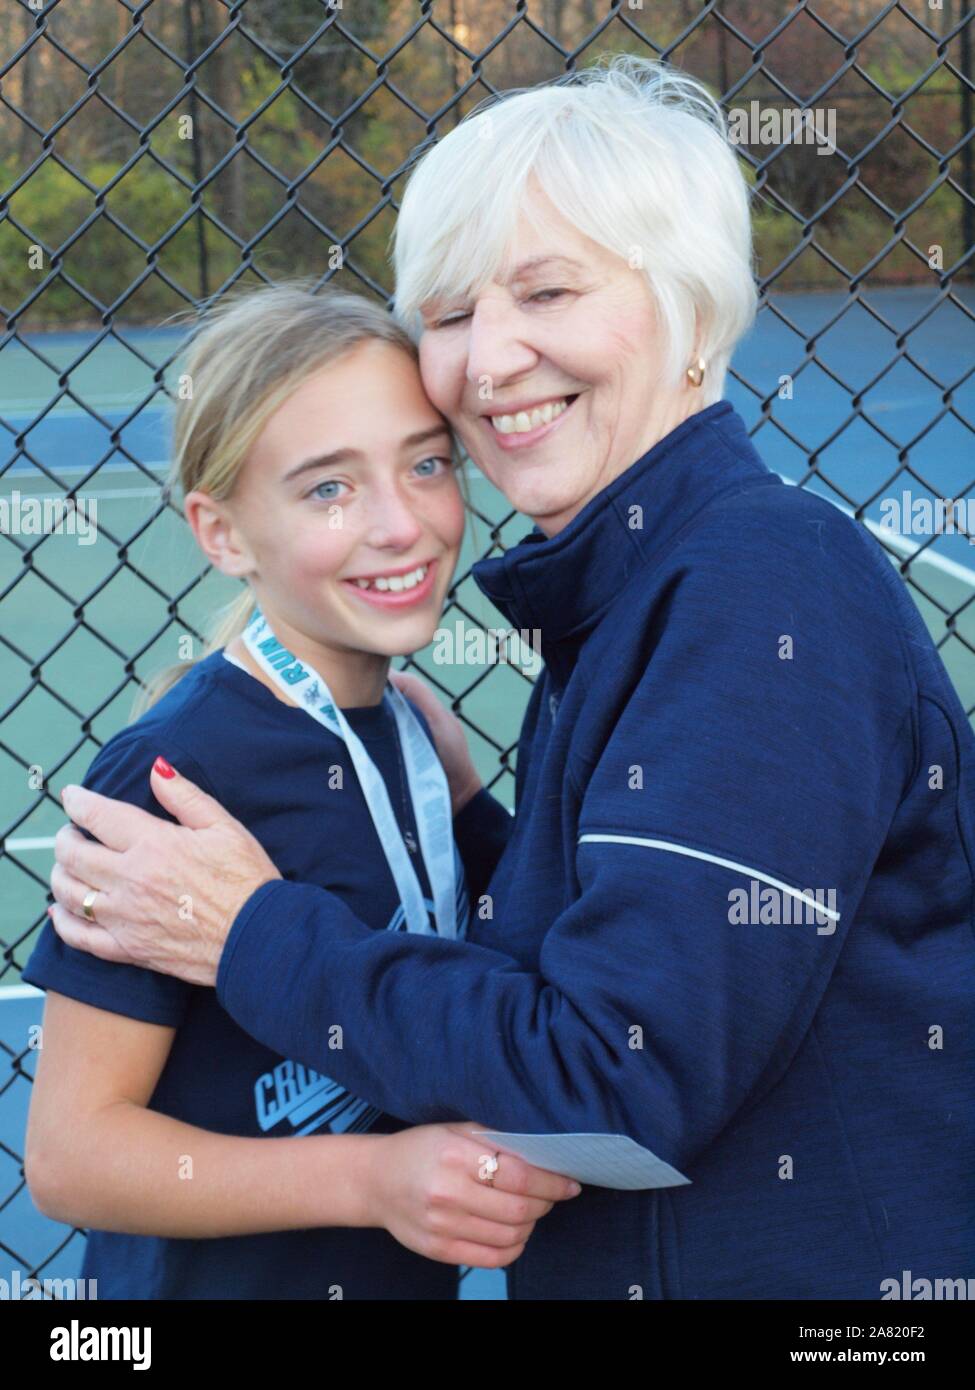 Grandmother congratulating granddaughter after cross-country race in New Jersey middle school. Stock Photo